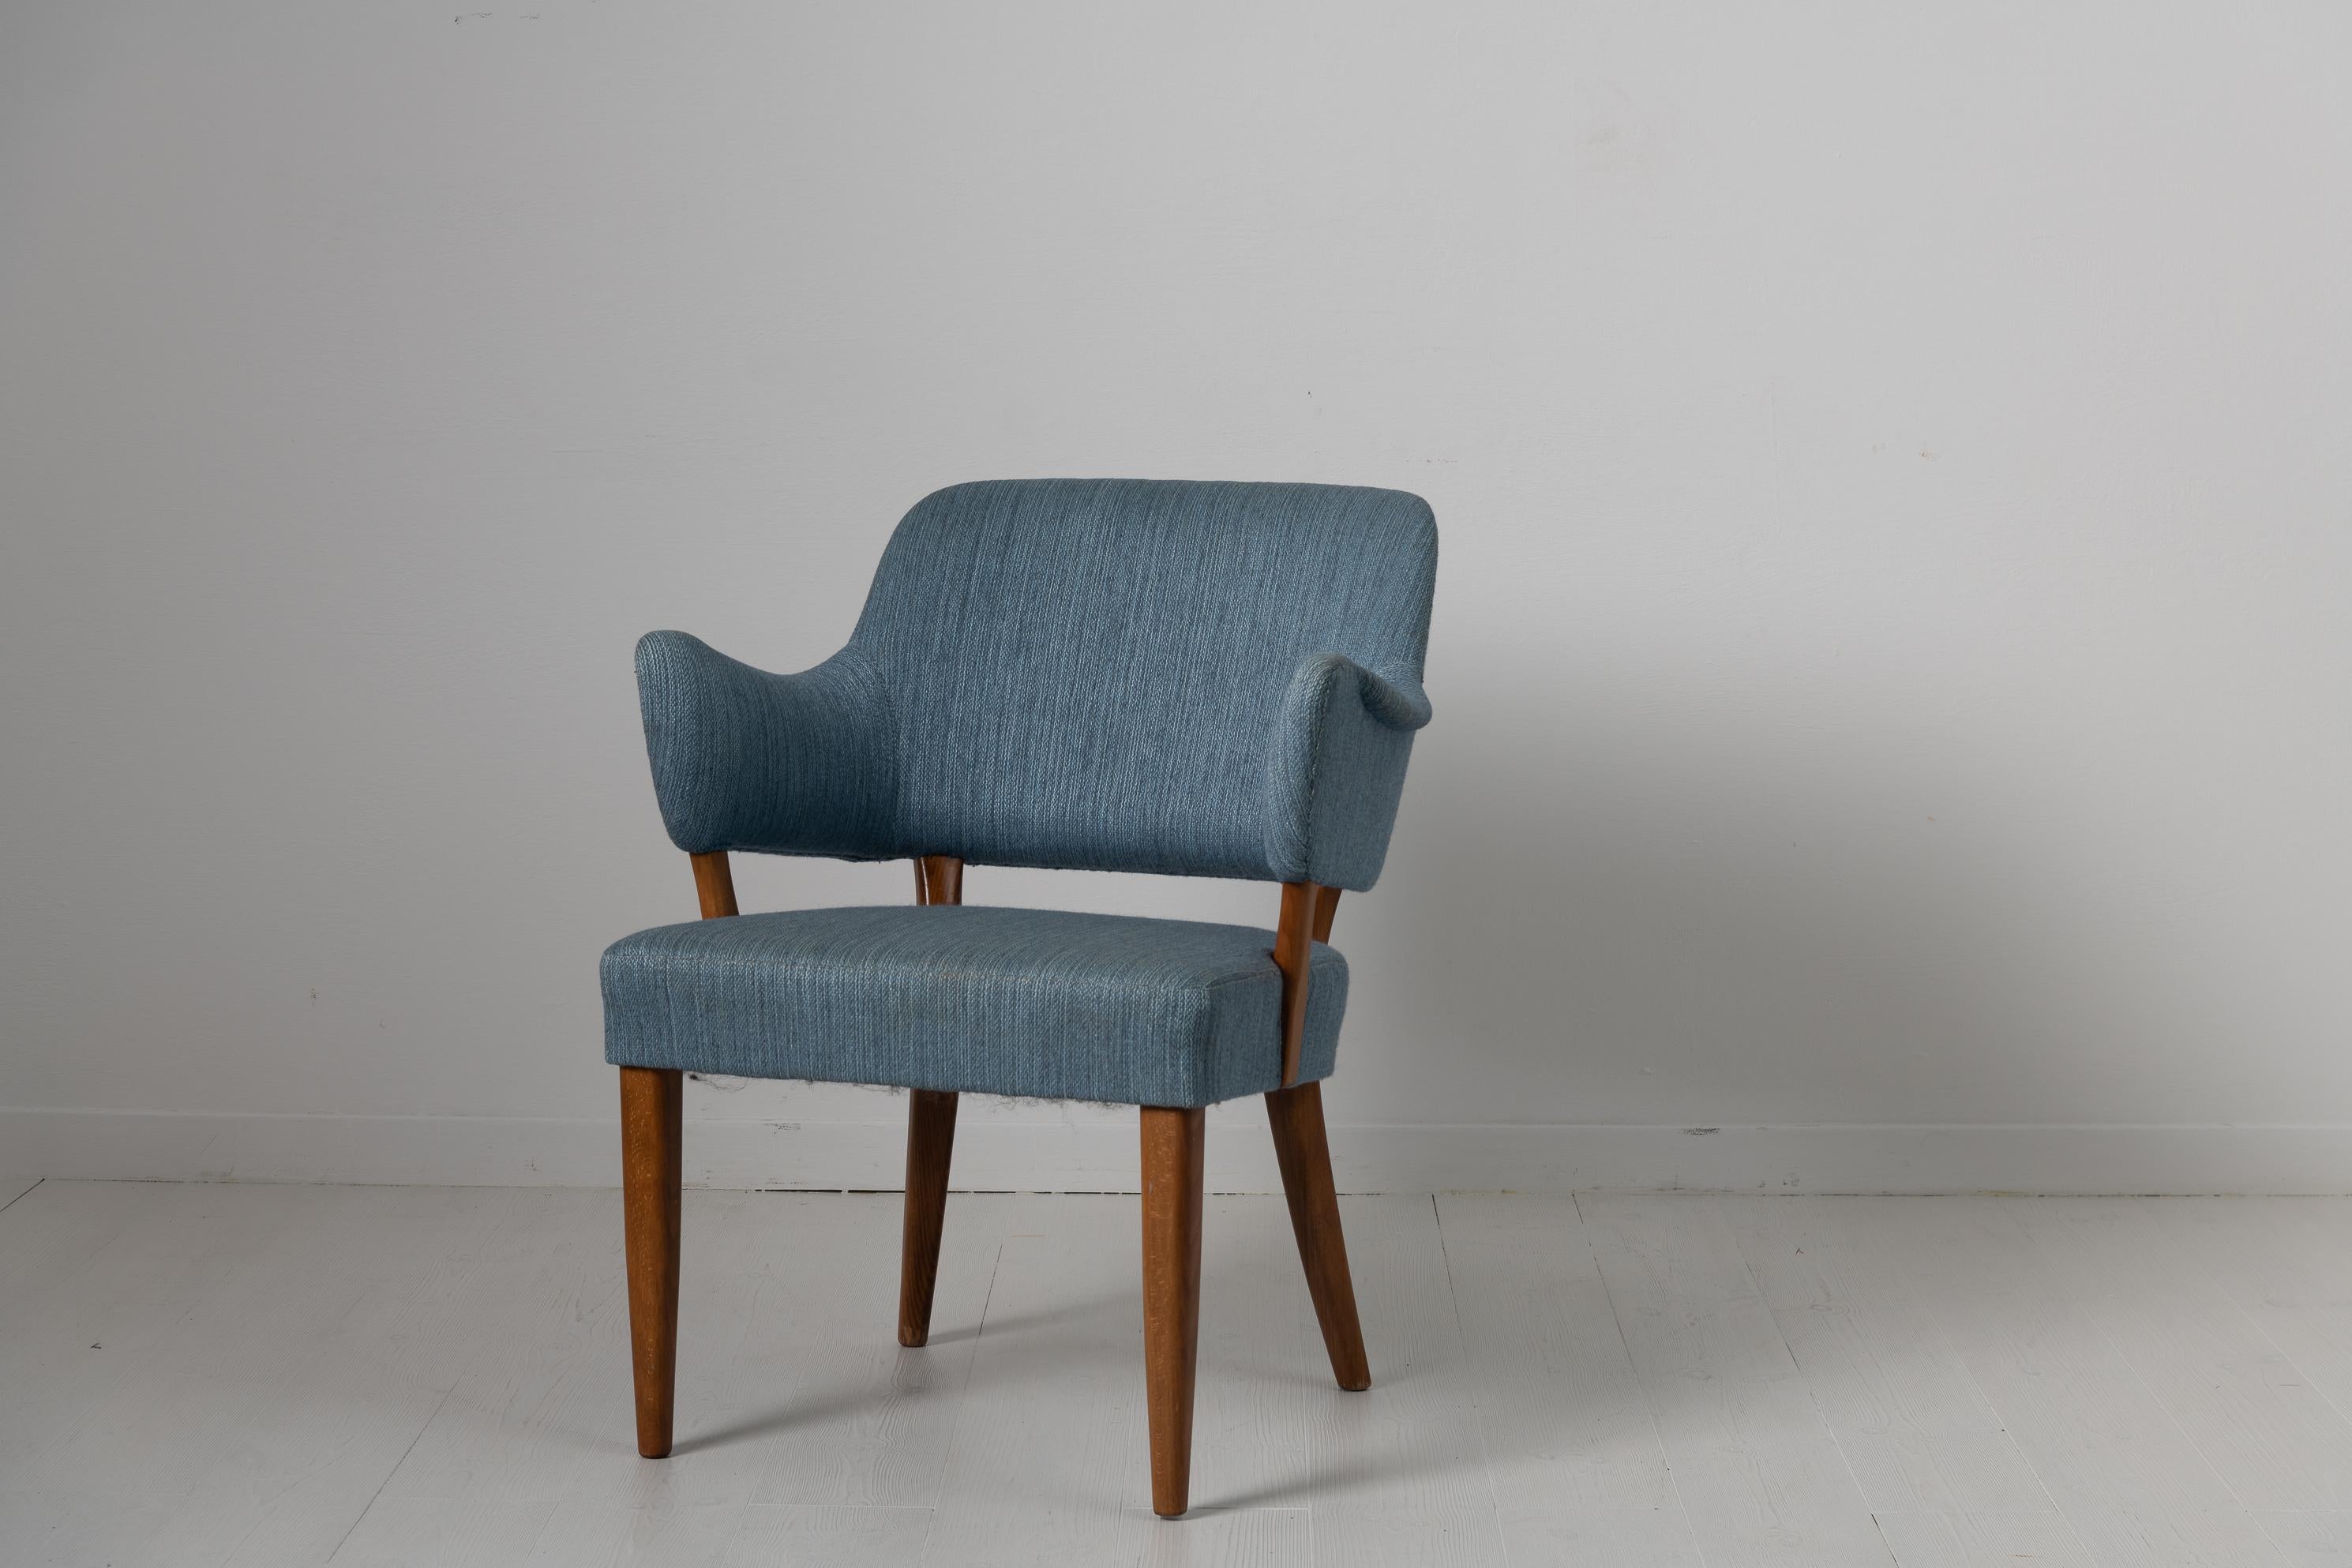 Scandinavian modern ”Lata Greven” chair designed by Carl Malmsten during the mid 20th century, 1953. Produced by O.H Sjögren. The name translates to the ”lazy count” and is a classy but comfortable chair fit for nobility. The frame is solid birch